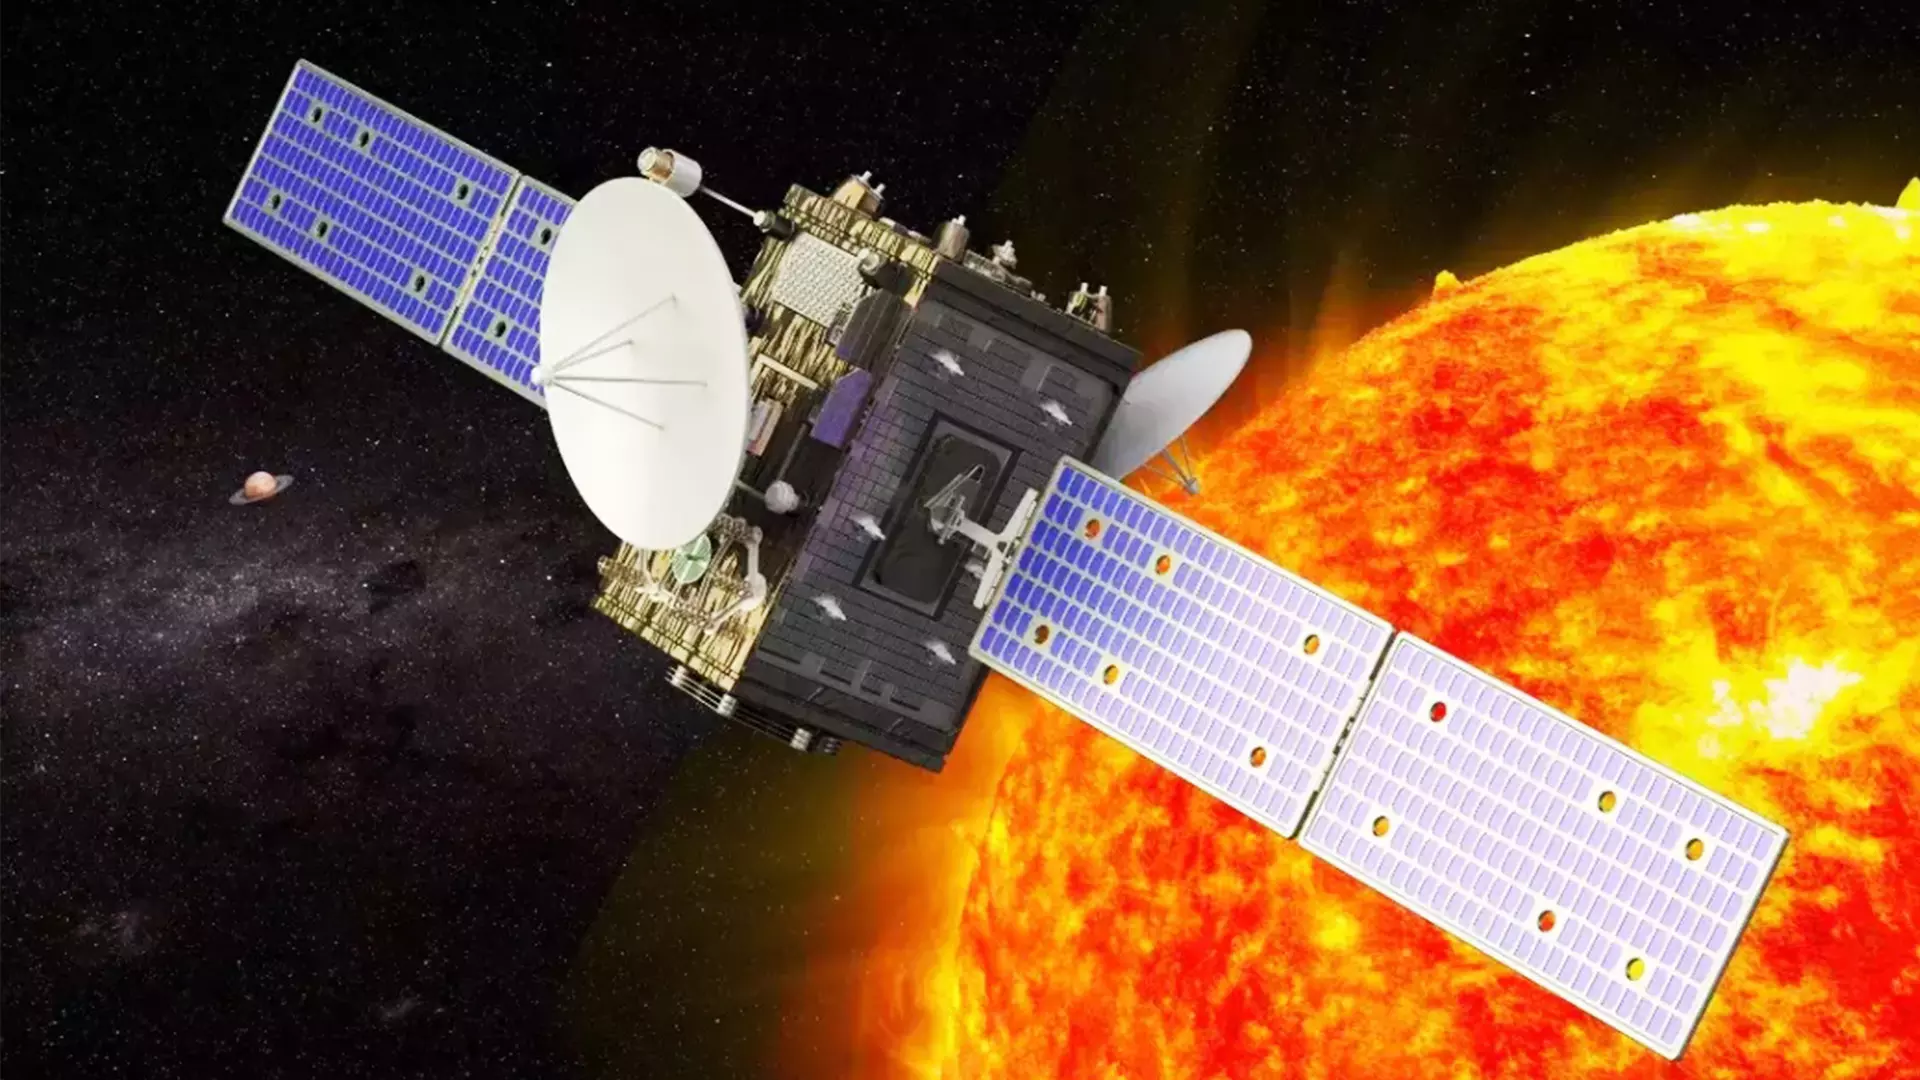 Aditya L1, India’s first solar space probe, is on its way to its parking slot about 15 million kilometres away in the direction of the Sun.